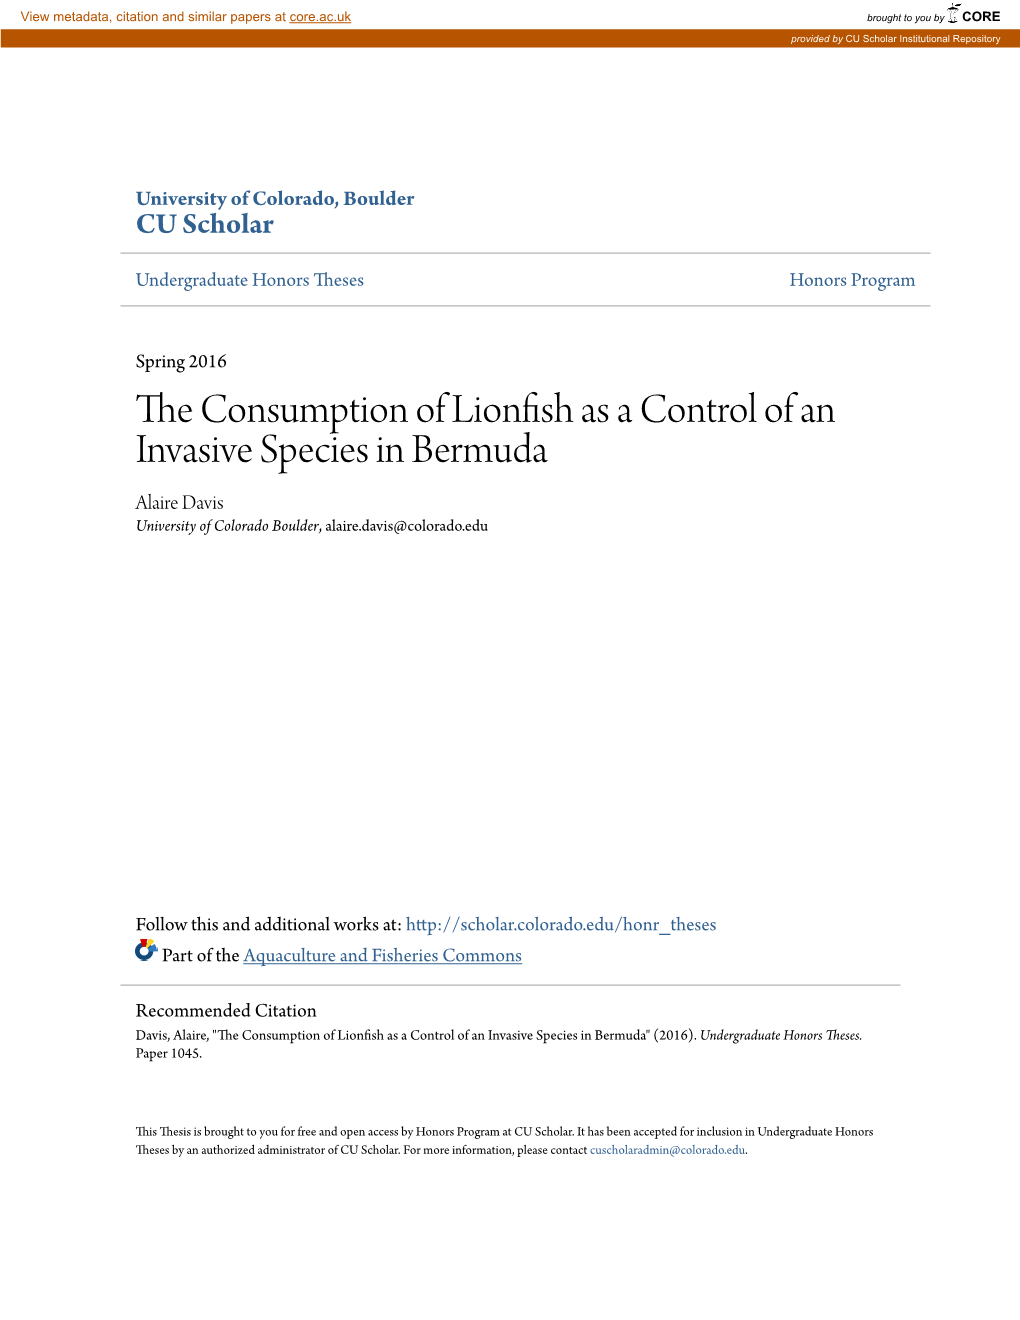 The Consumption of Lionfish As a Control of an Invasive Species in Bermuda